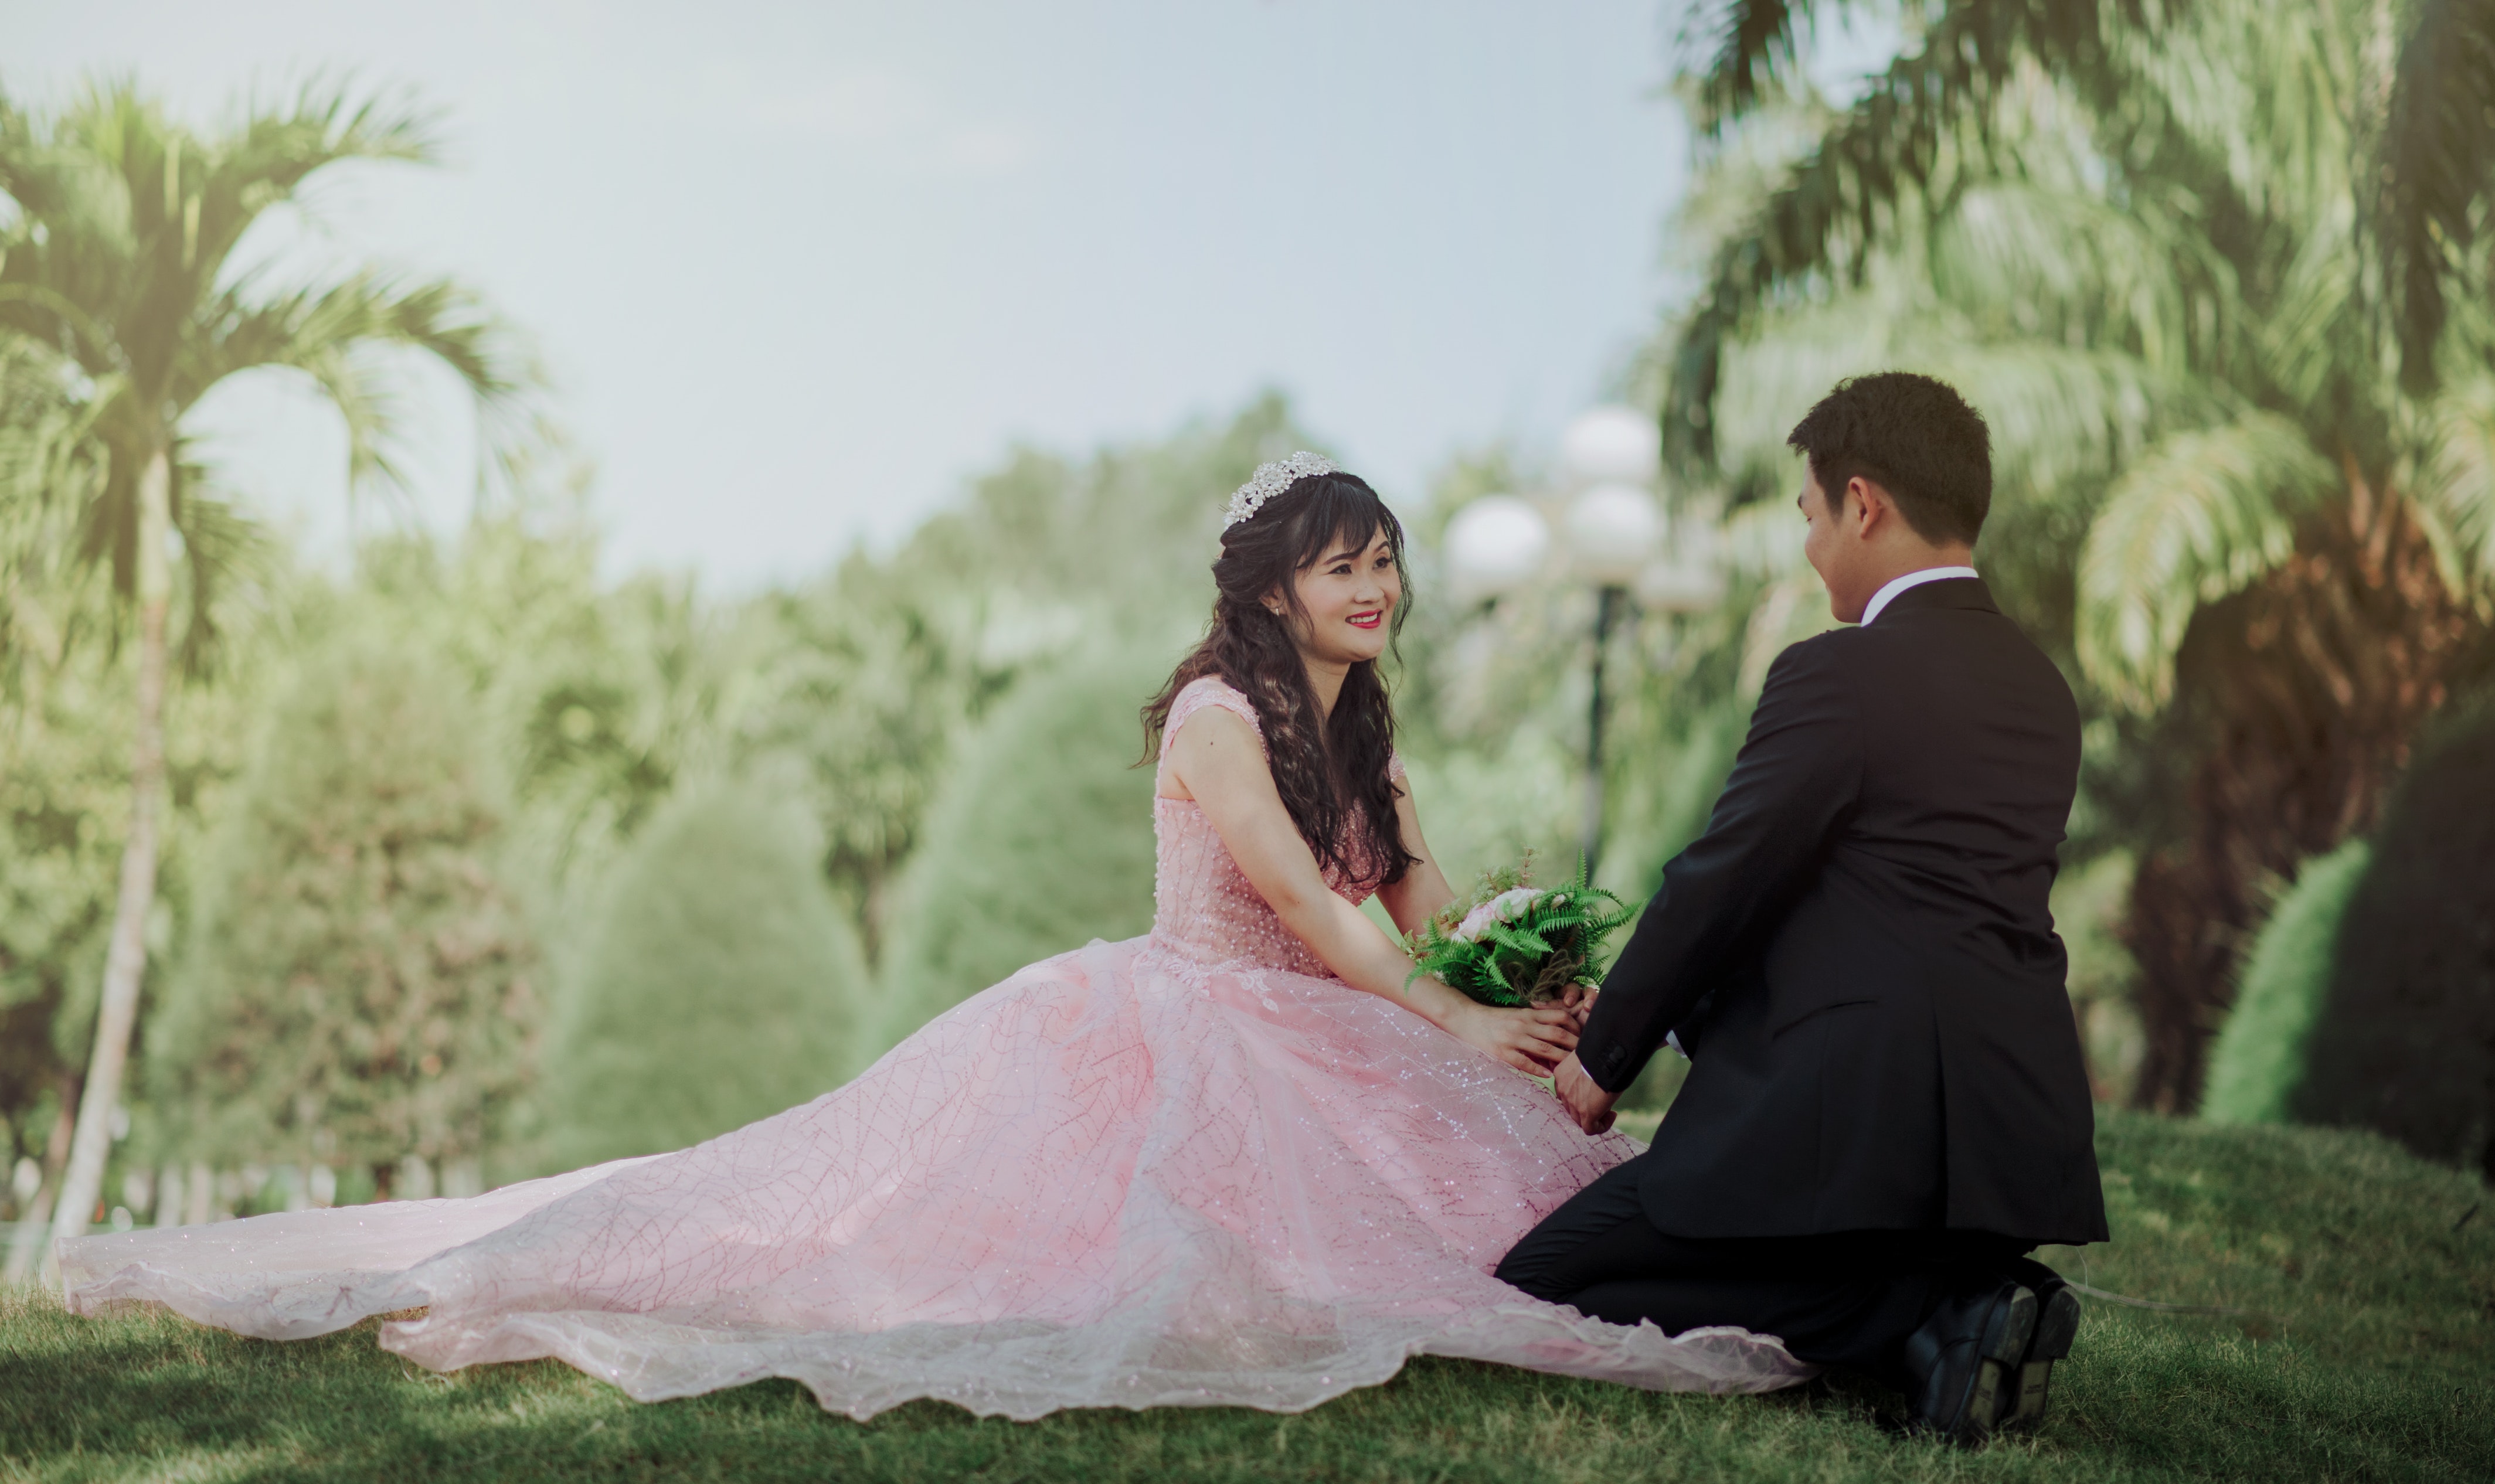 Couple Sitting on Grass, Smiling, Photoshoot, Portrait, Relaxation, HQ Photo